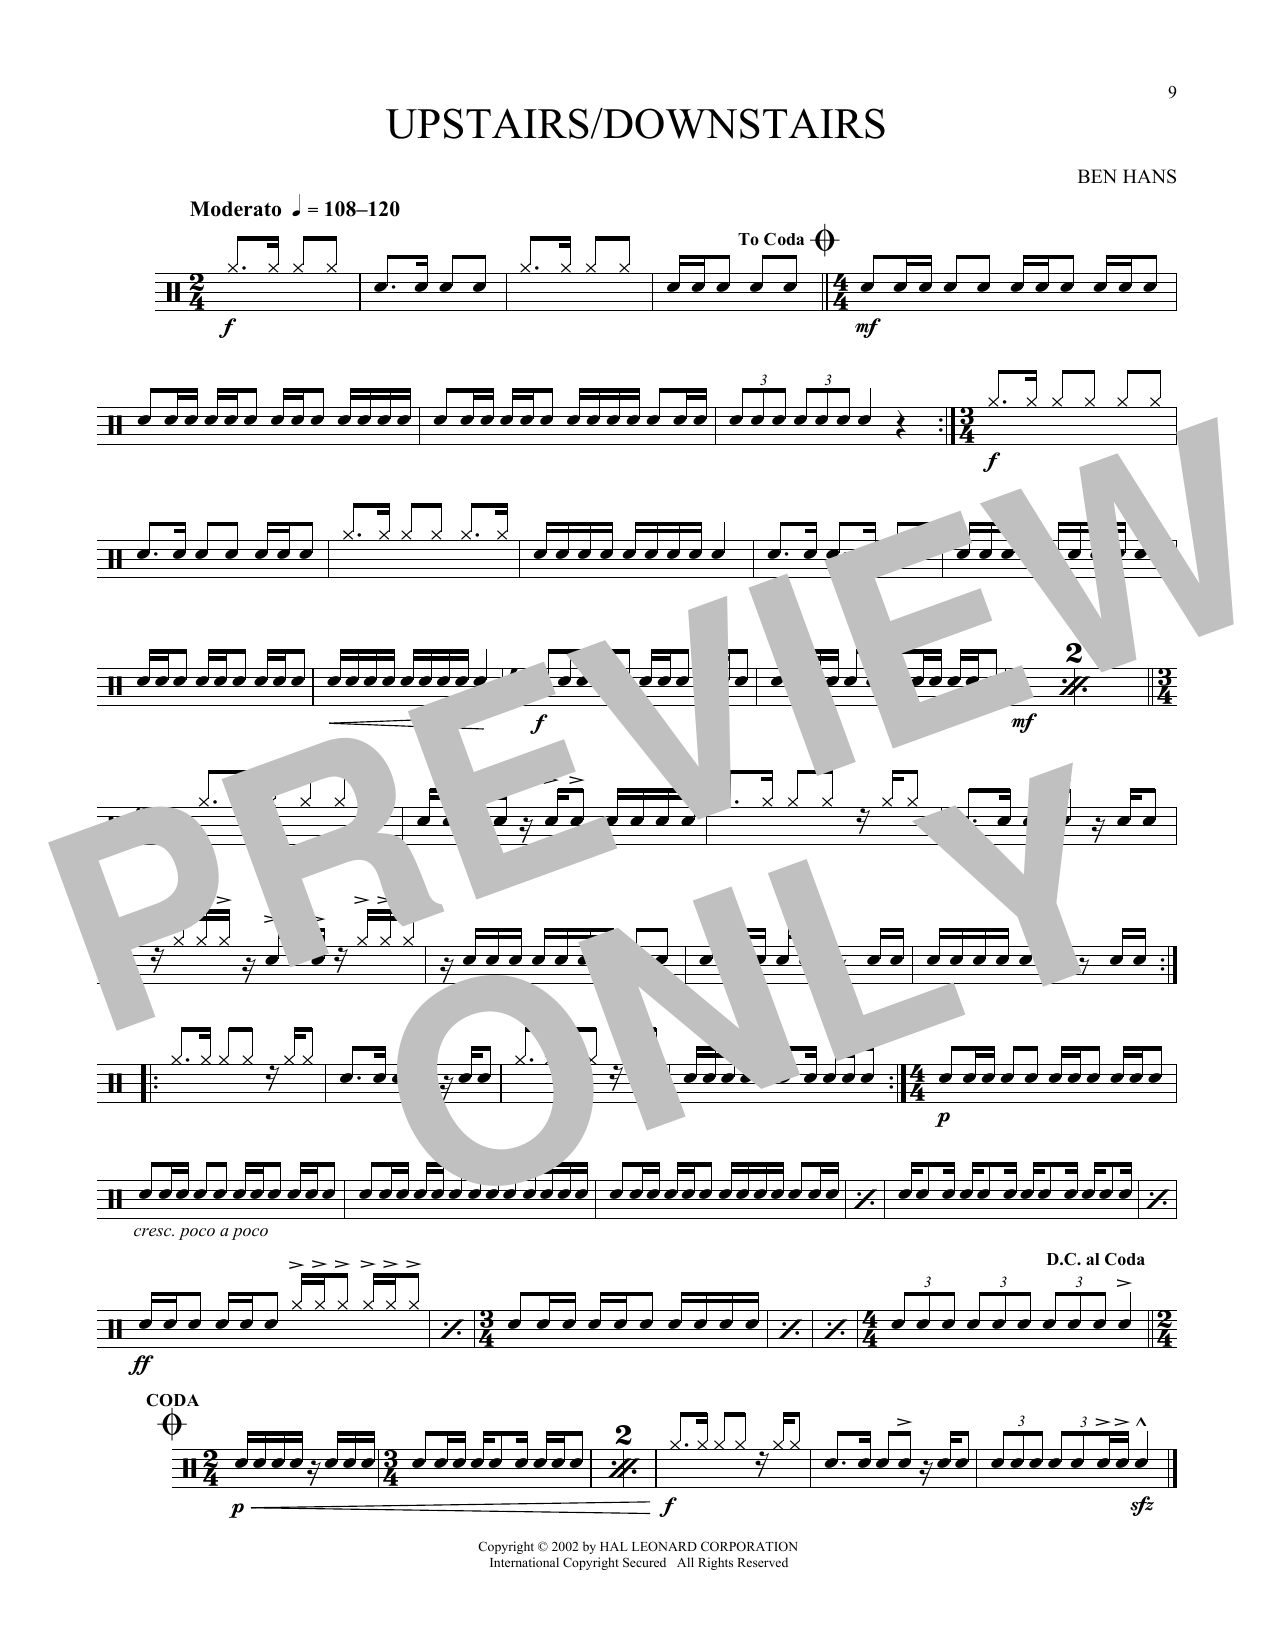 Ben Hans Upstairs/Downstairs sheet music notes and chords. Download Printable PDF.